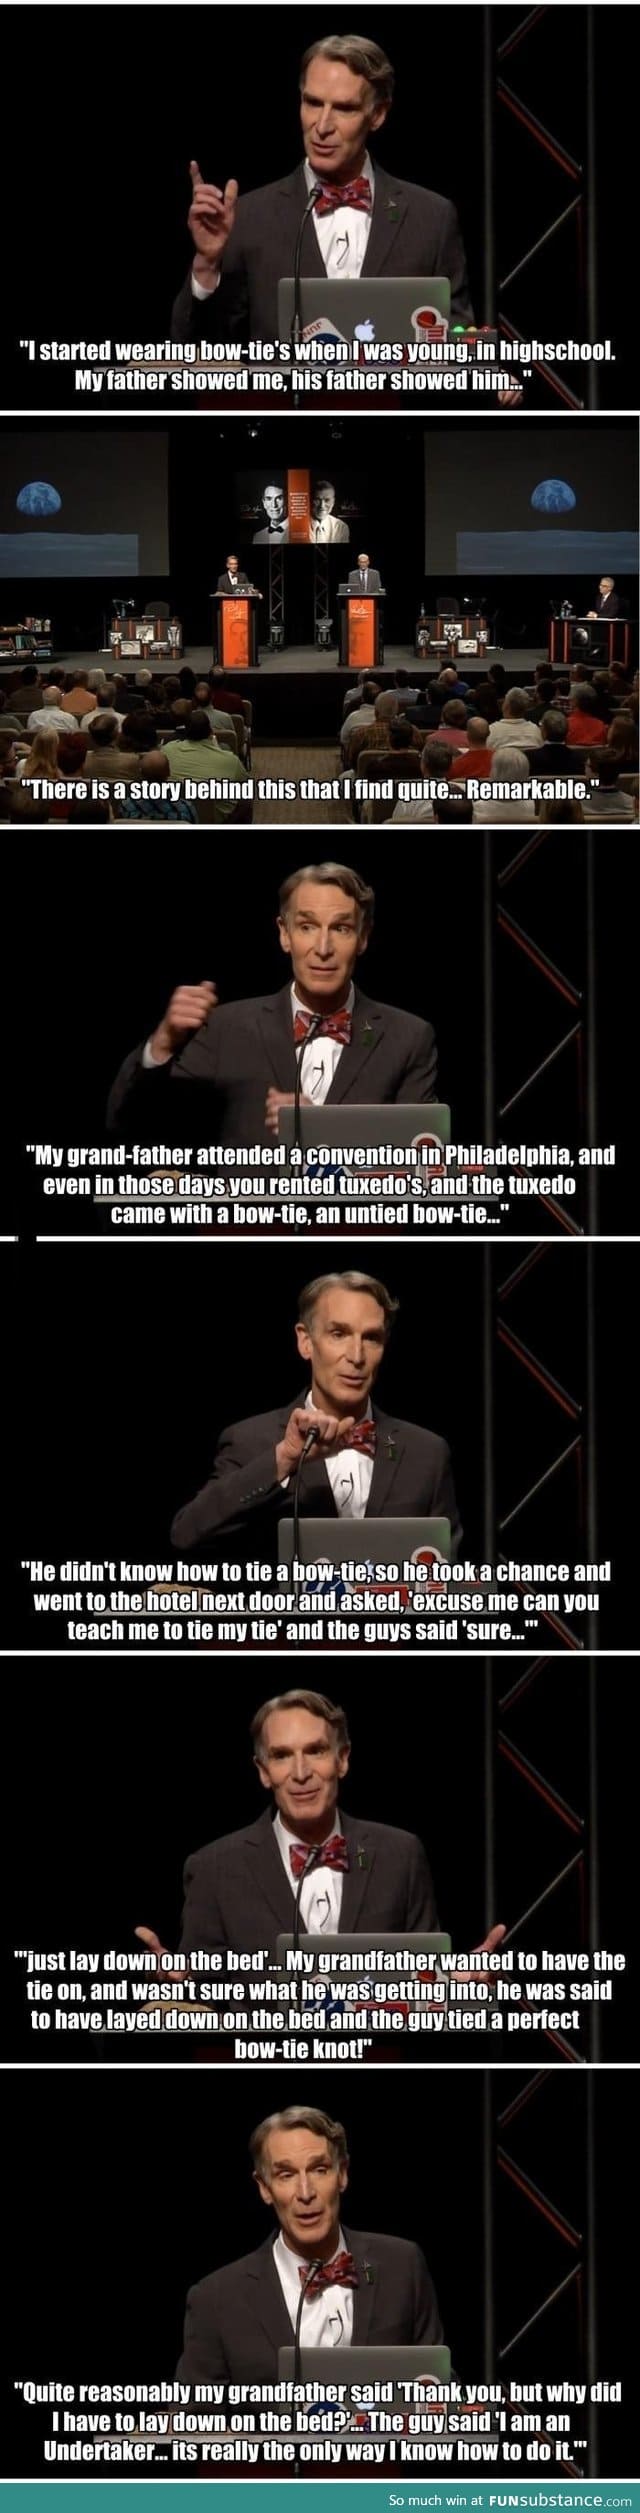 Bill Nye on the story behind his bow tie